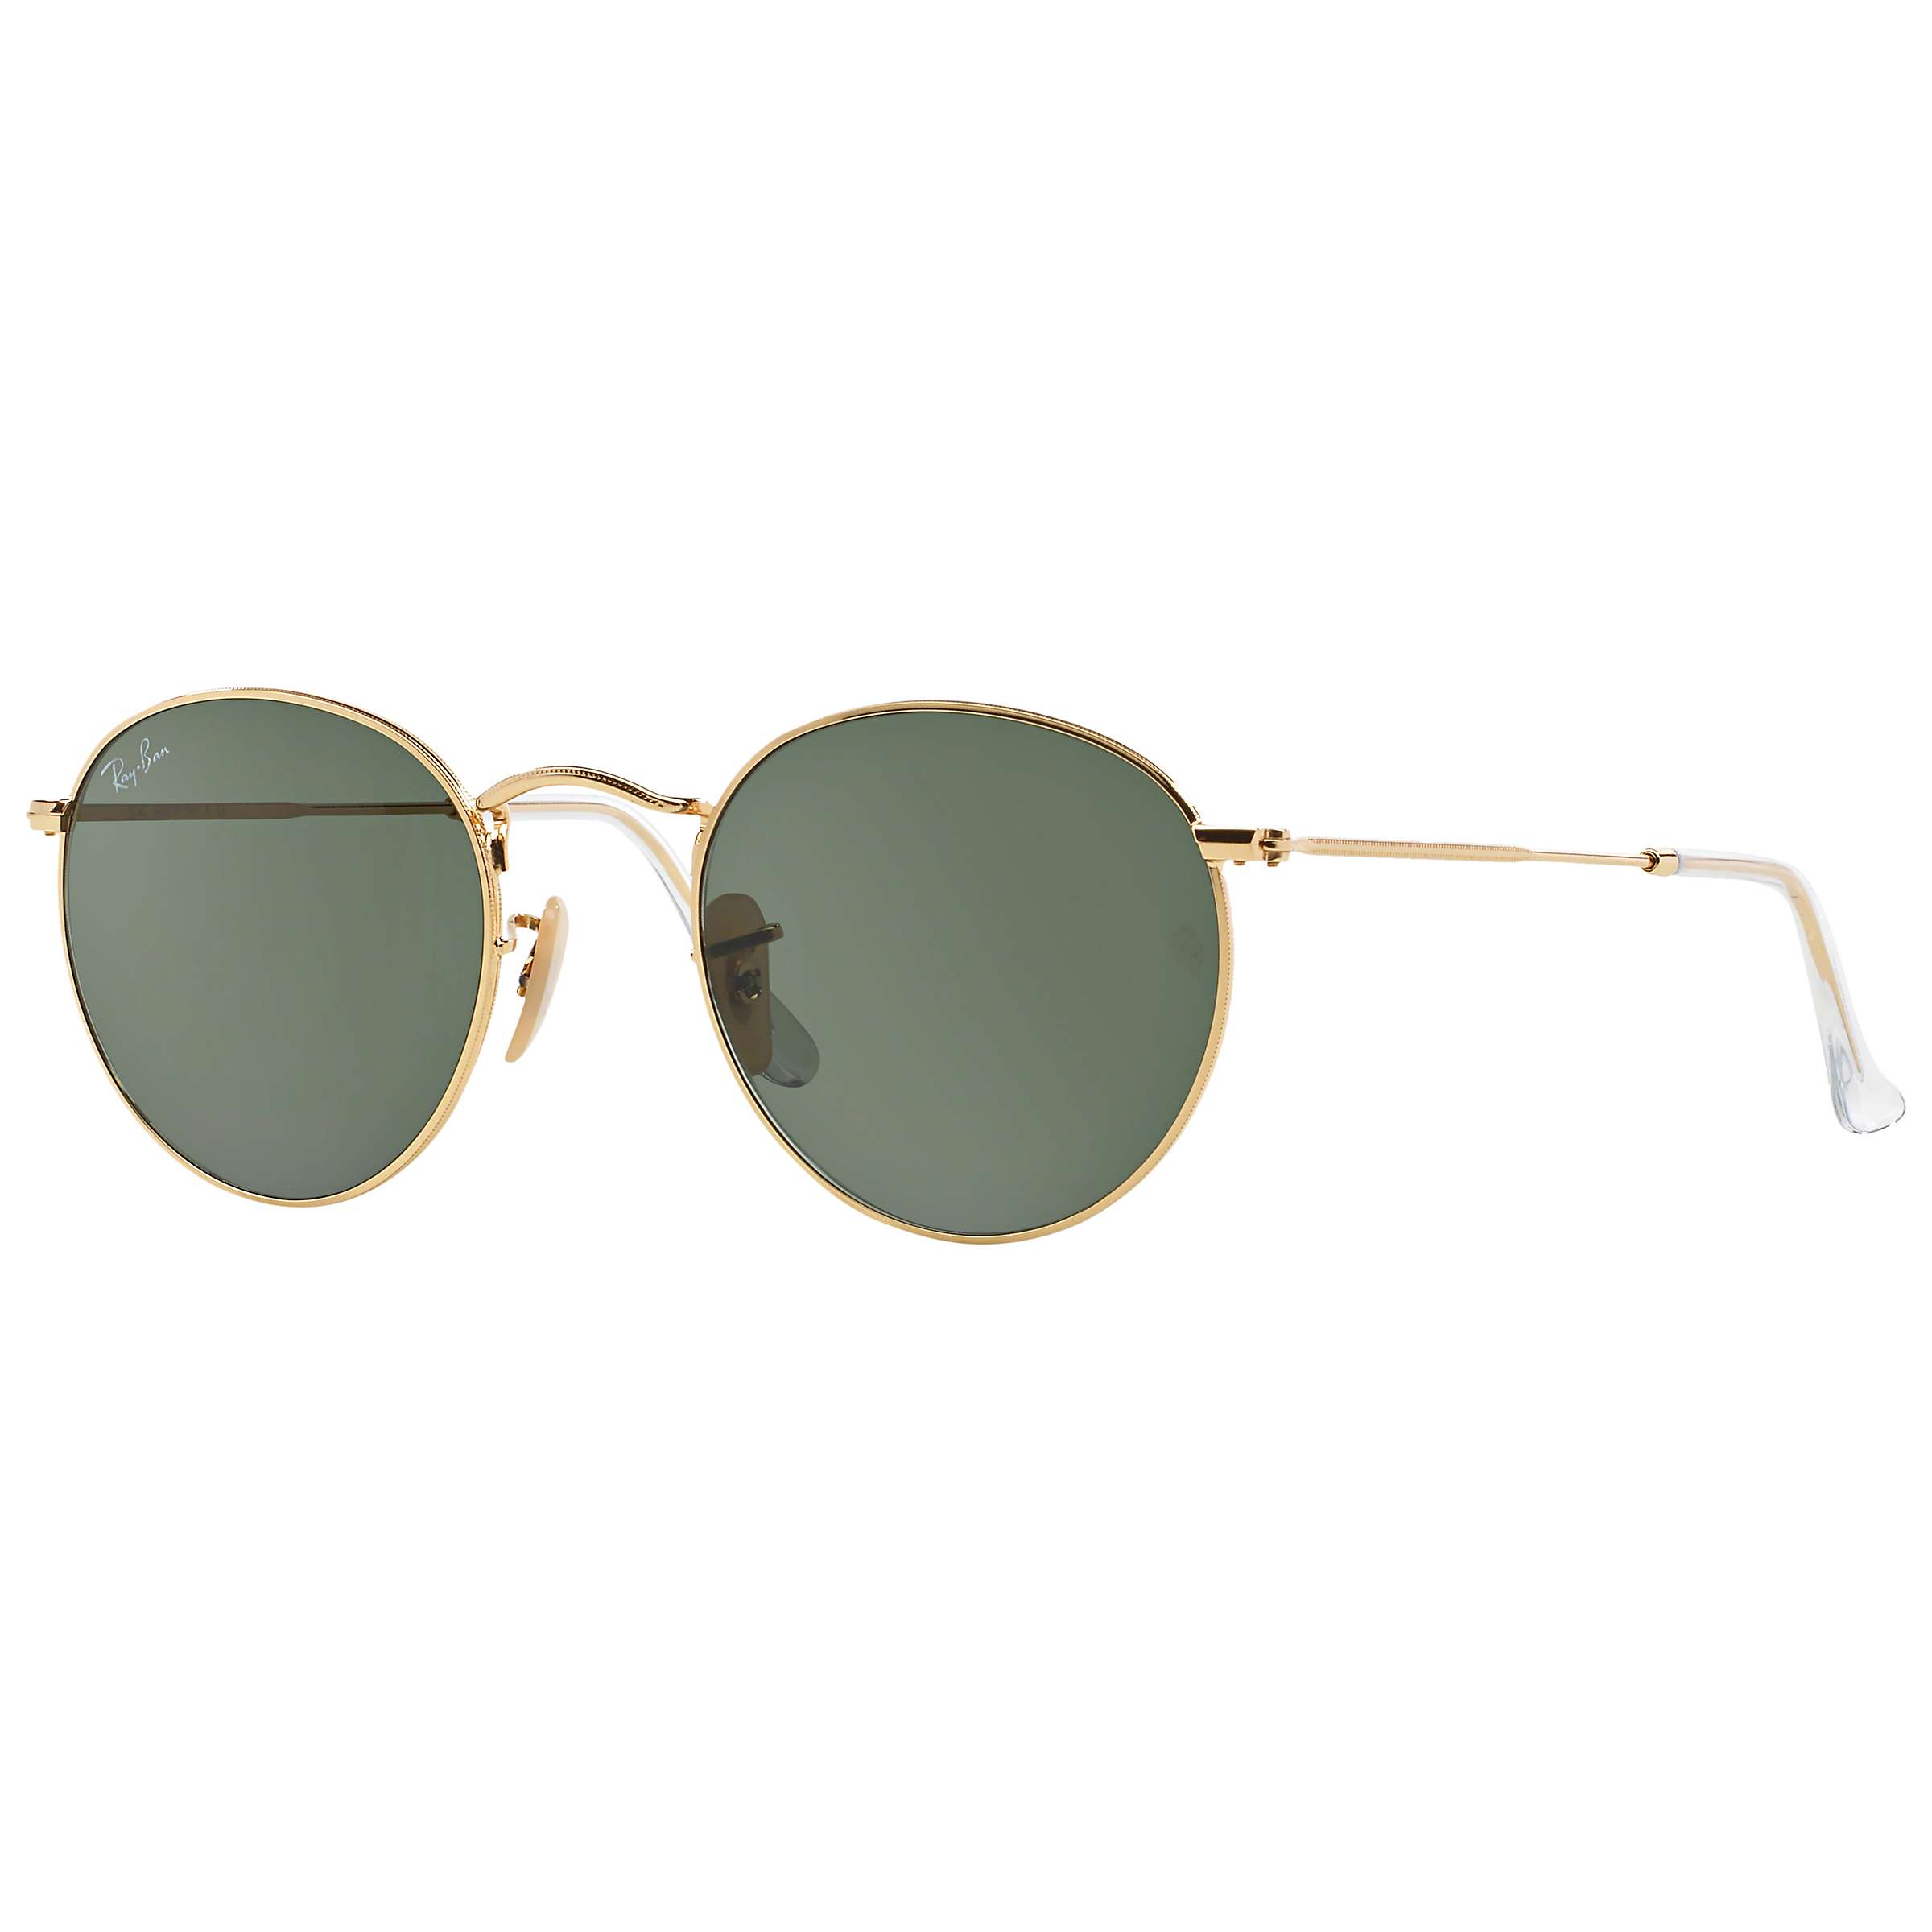 Buy Ray-Ban RB3447 Round Metal Sunglasses, Gold/Green Online at johnlewis.com